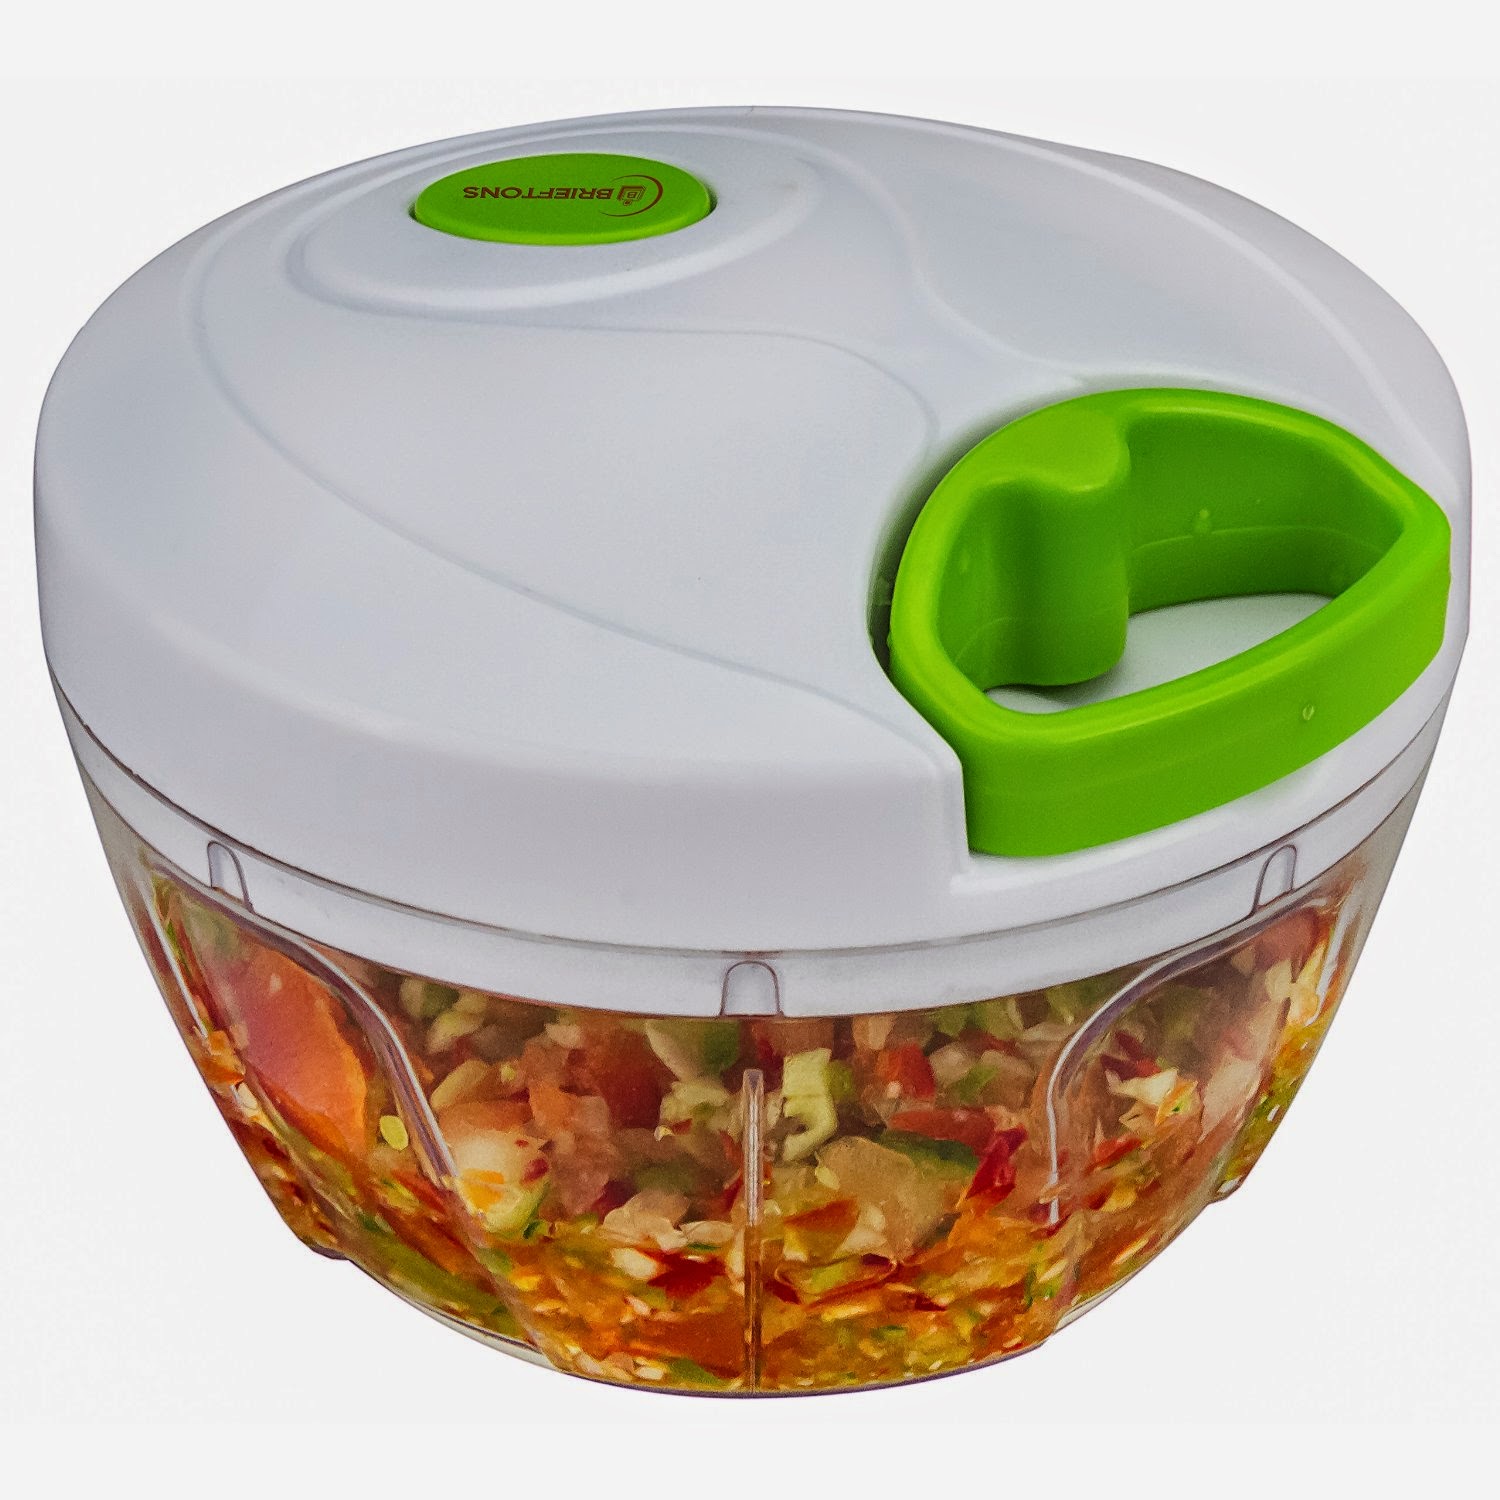 Popular Product Reviews by Amy: Manual Food Chopper by Brieftons Review